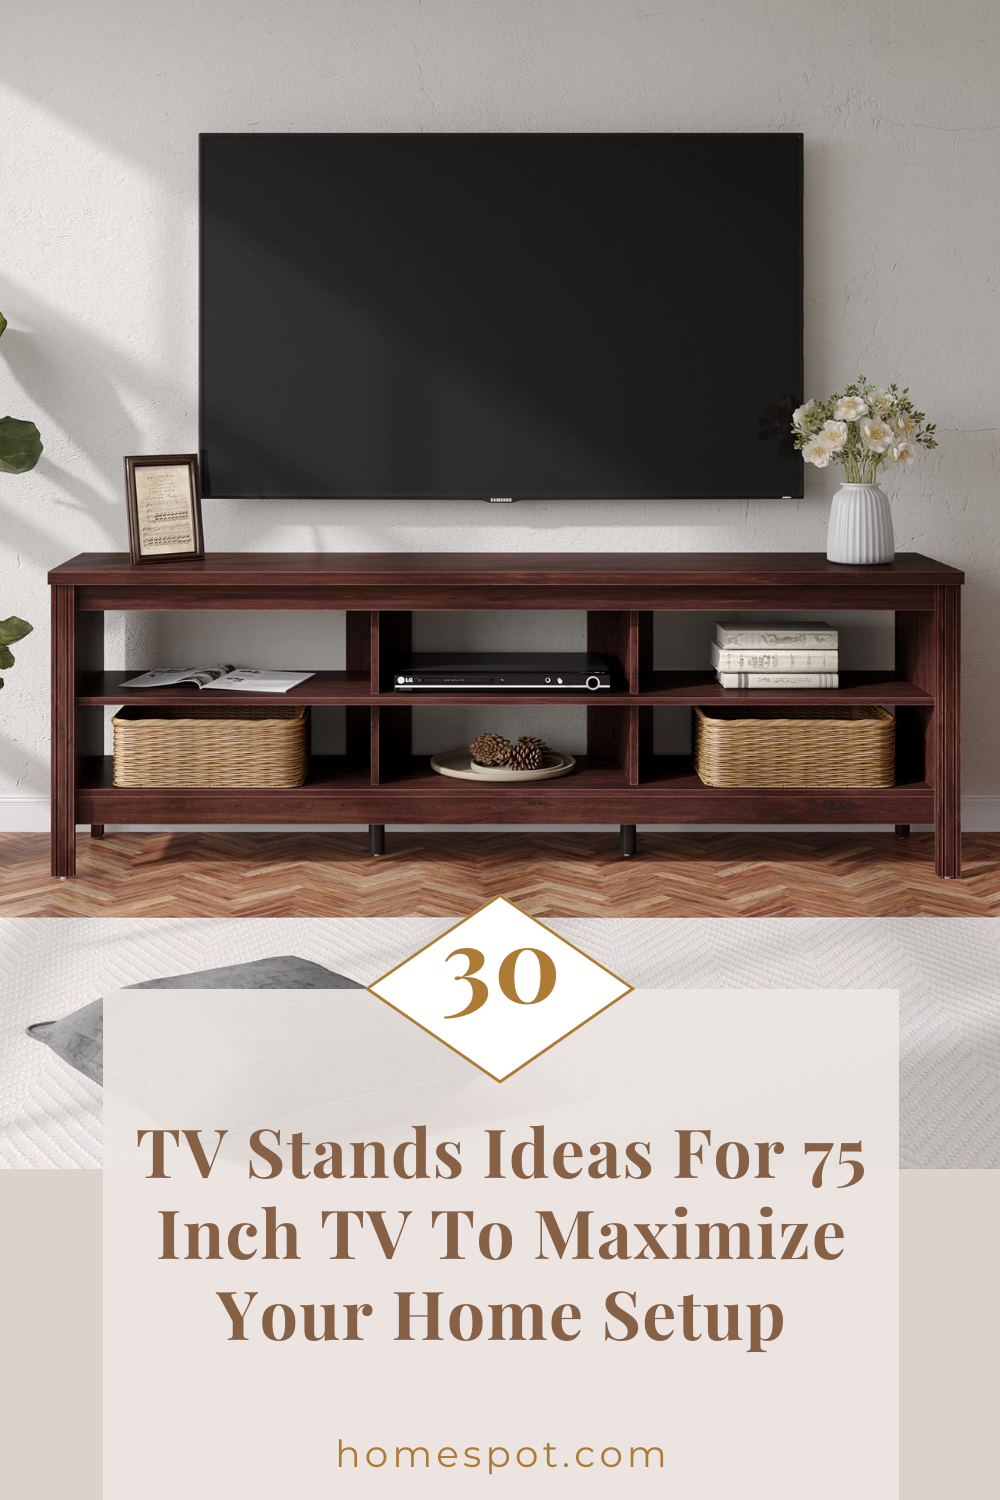 TV Stands Ideas For 75 Inch TV